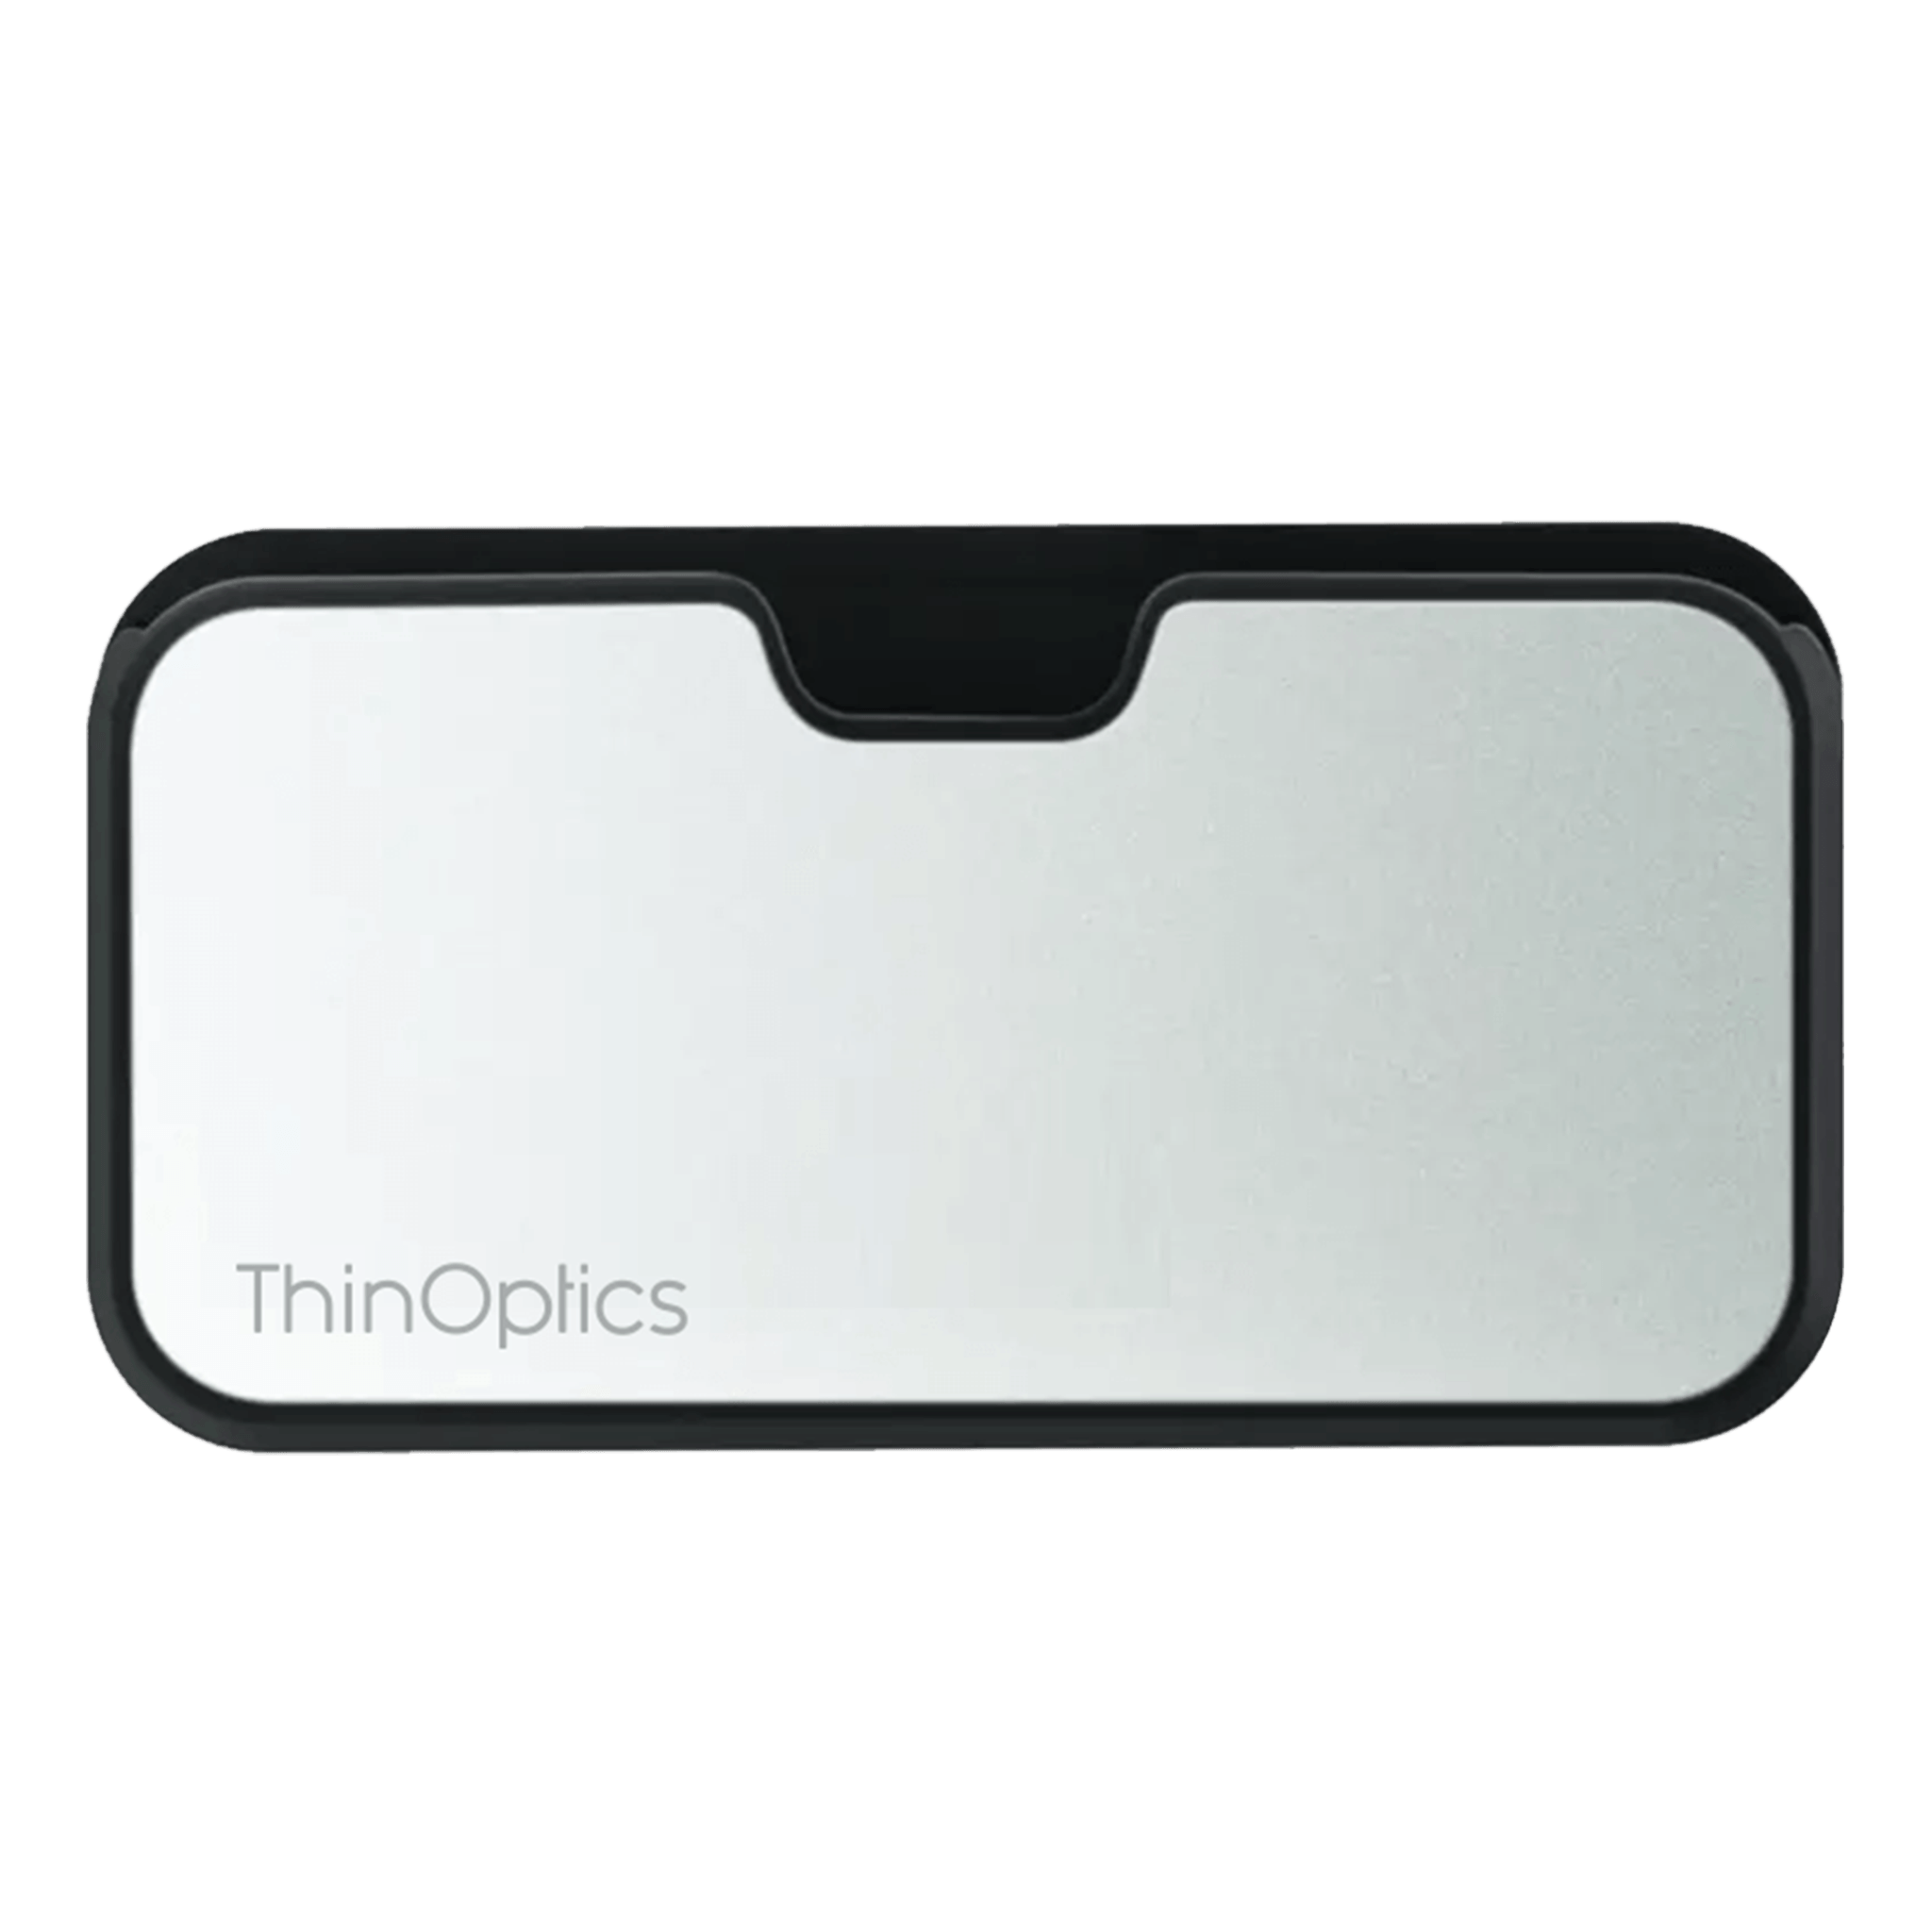 Out of the Park Universal Pod Case, ThinOptics